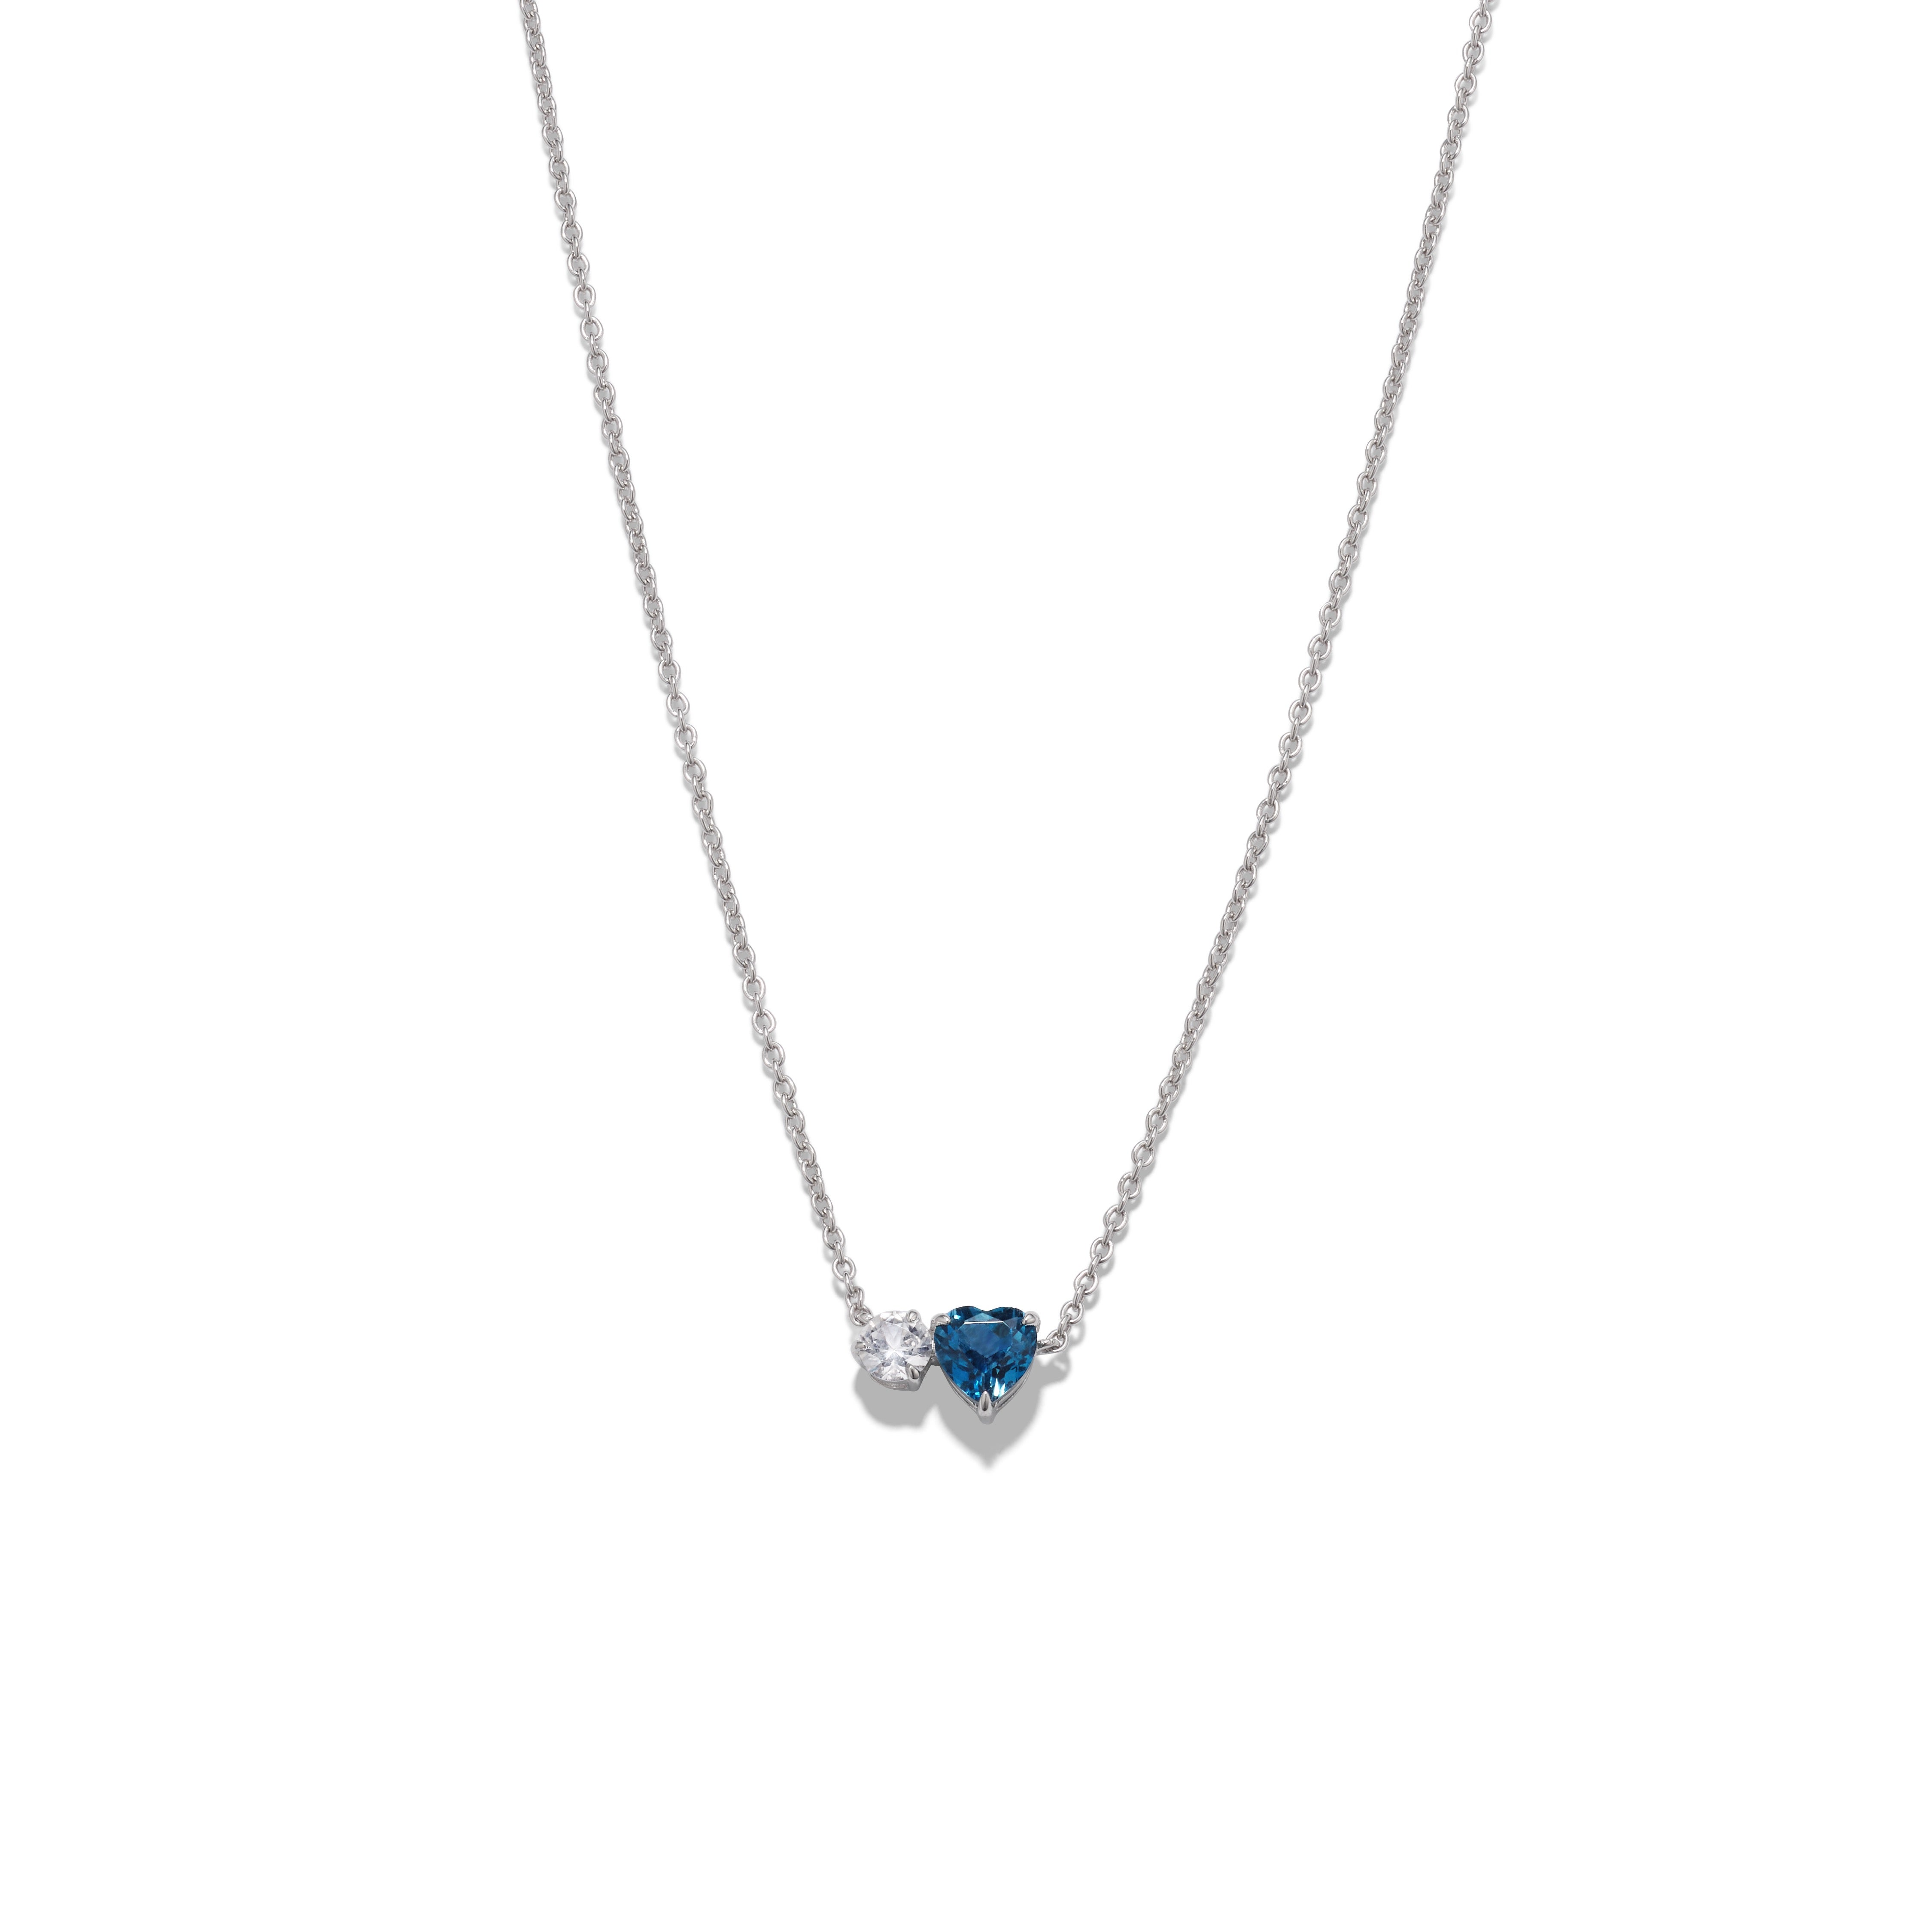 Shane Co. + Toi et Moi London Blue Topaz and White Sapphire Necklace in ...